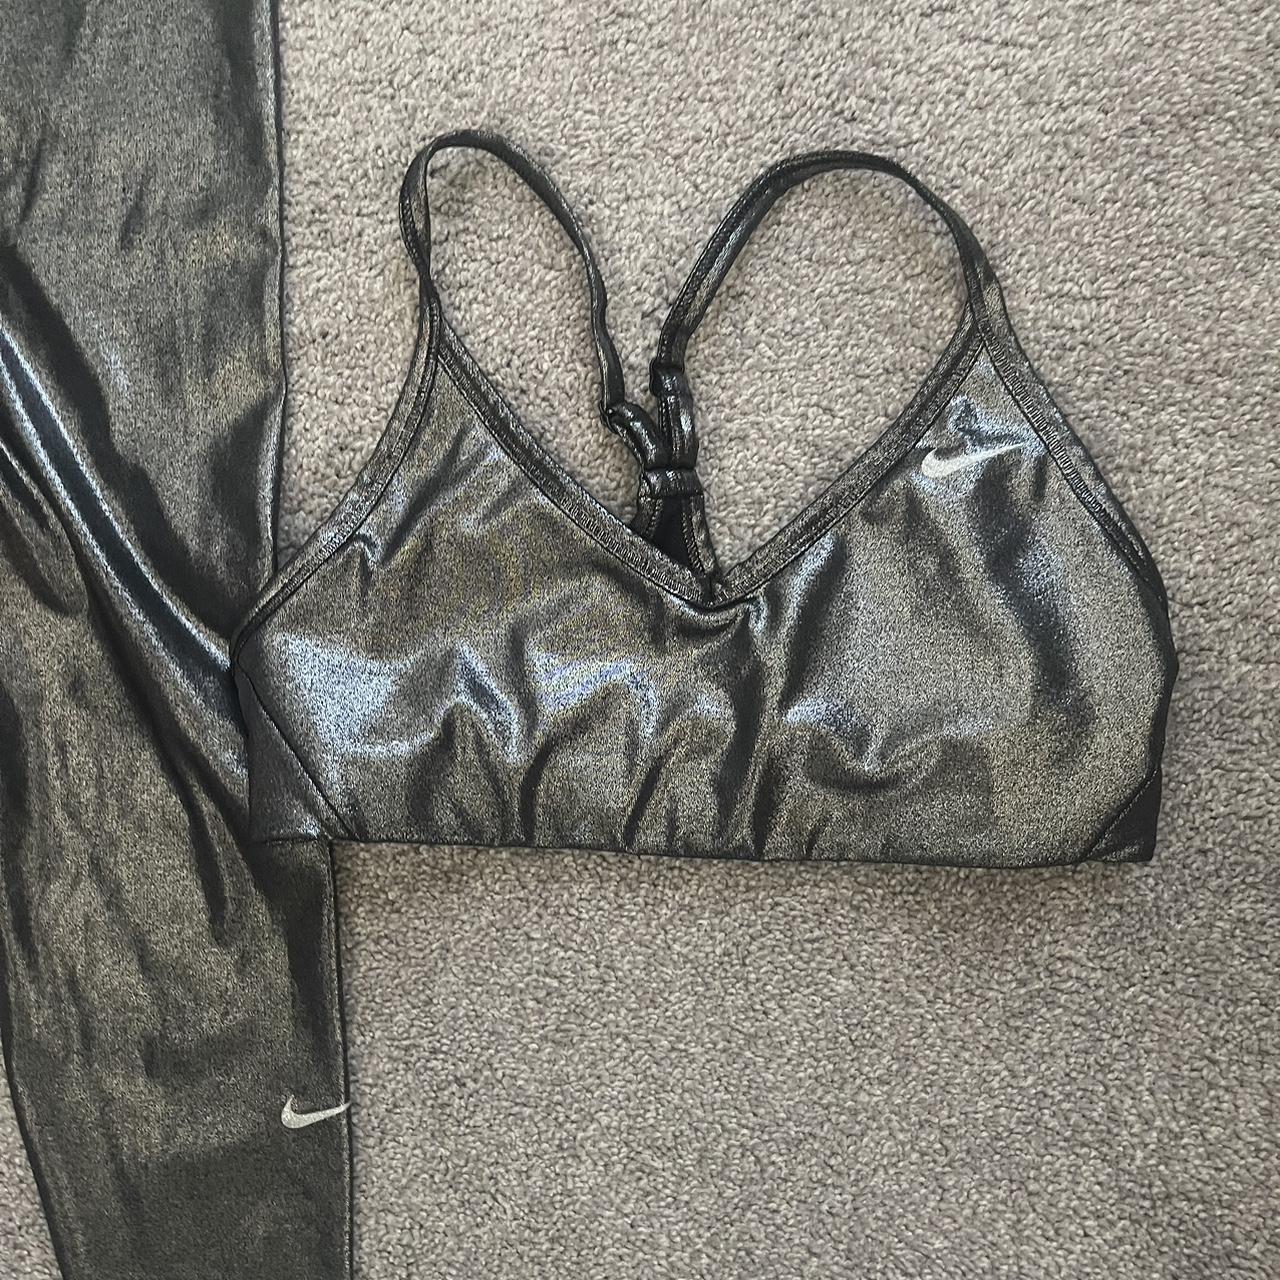 Small silver shiny leggings and bra workout set - Depop